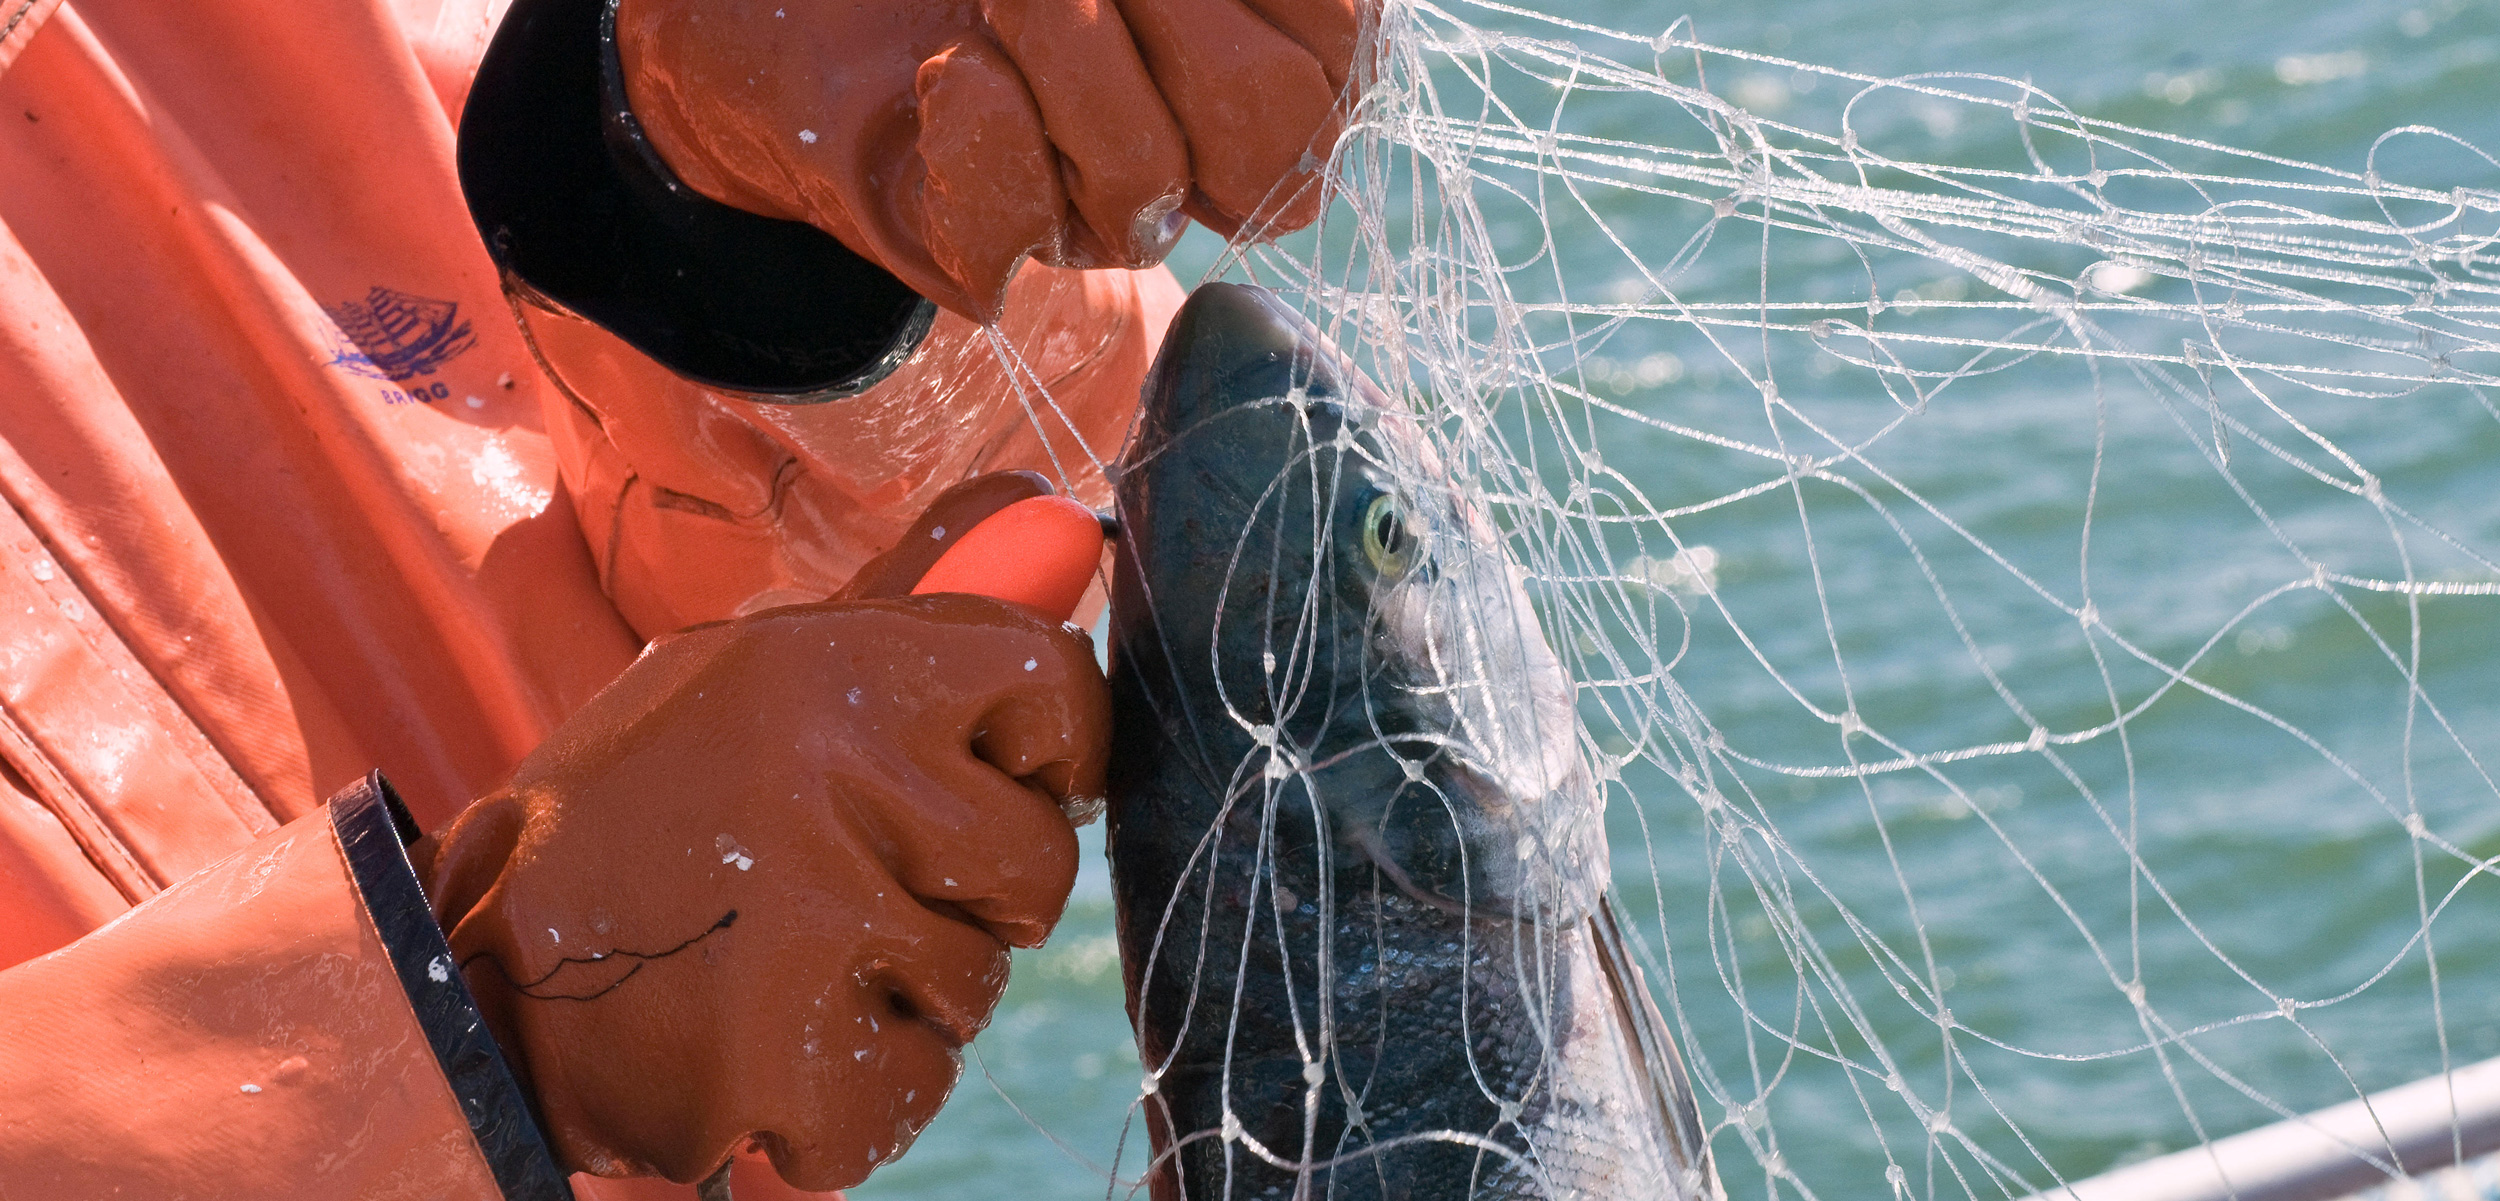 A fisher using a fish pick to remove a sockeye from a gillnet